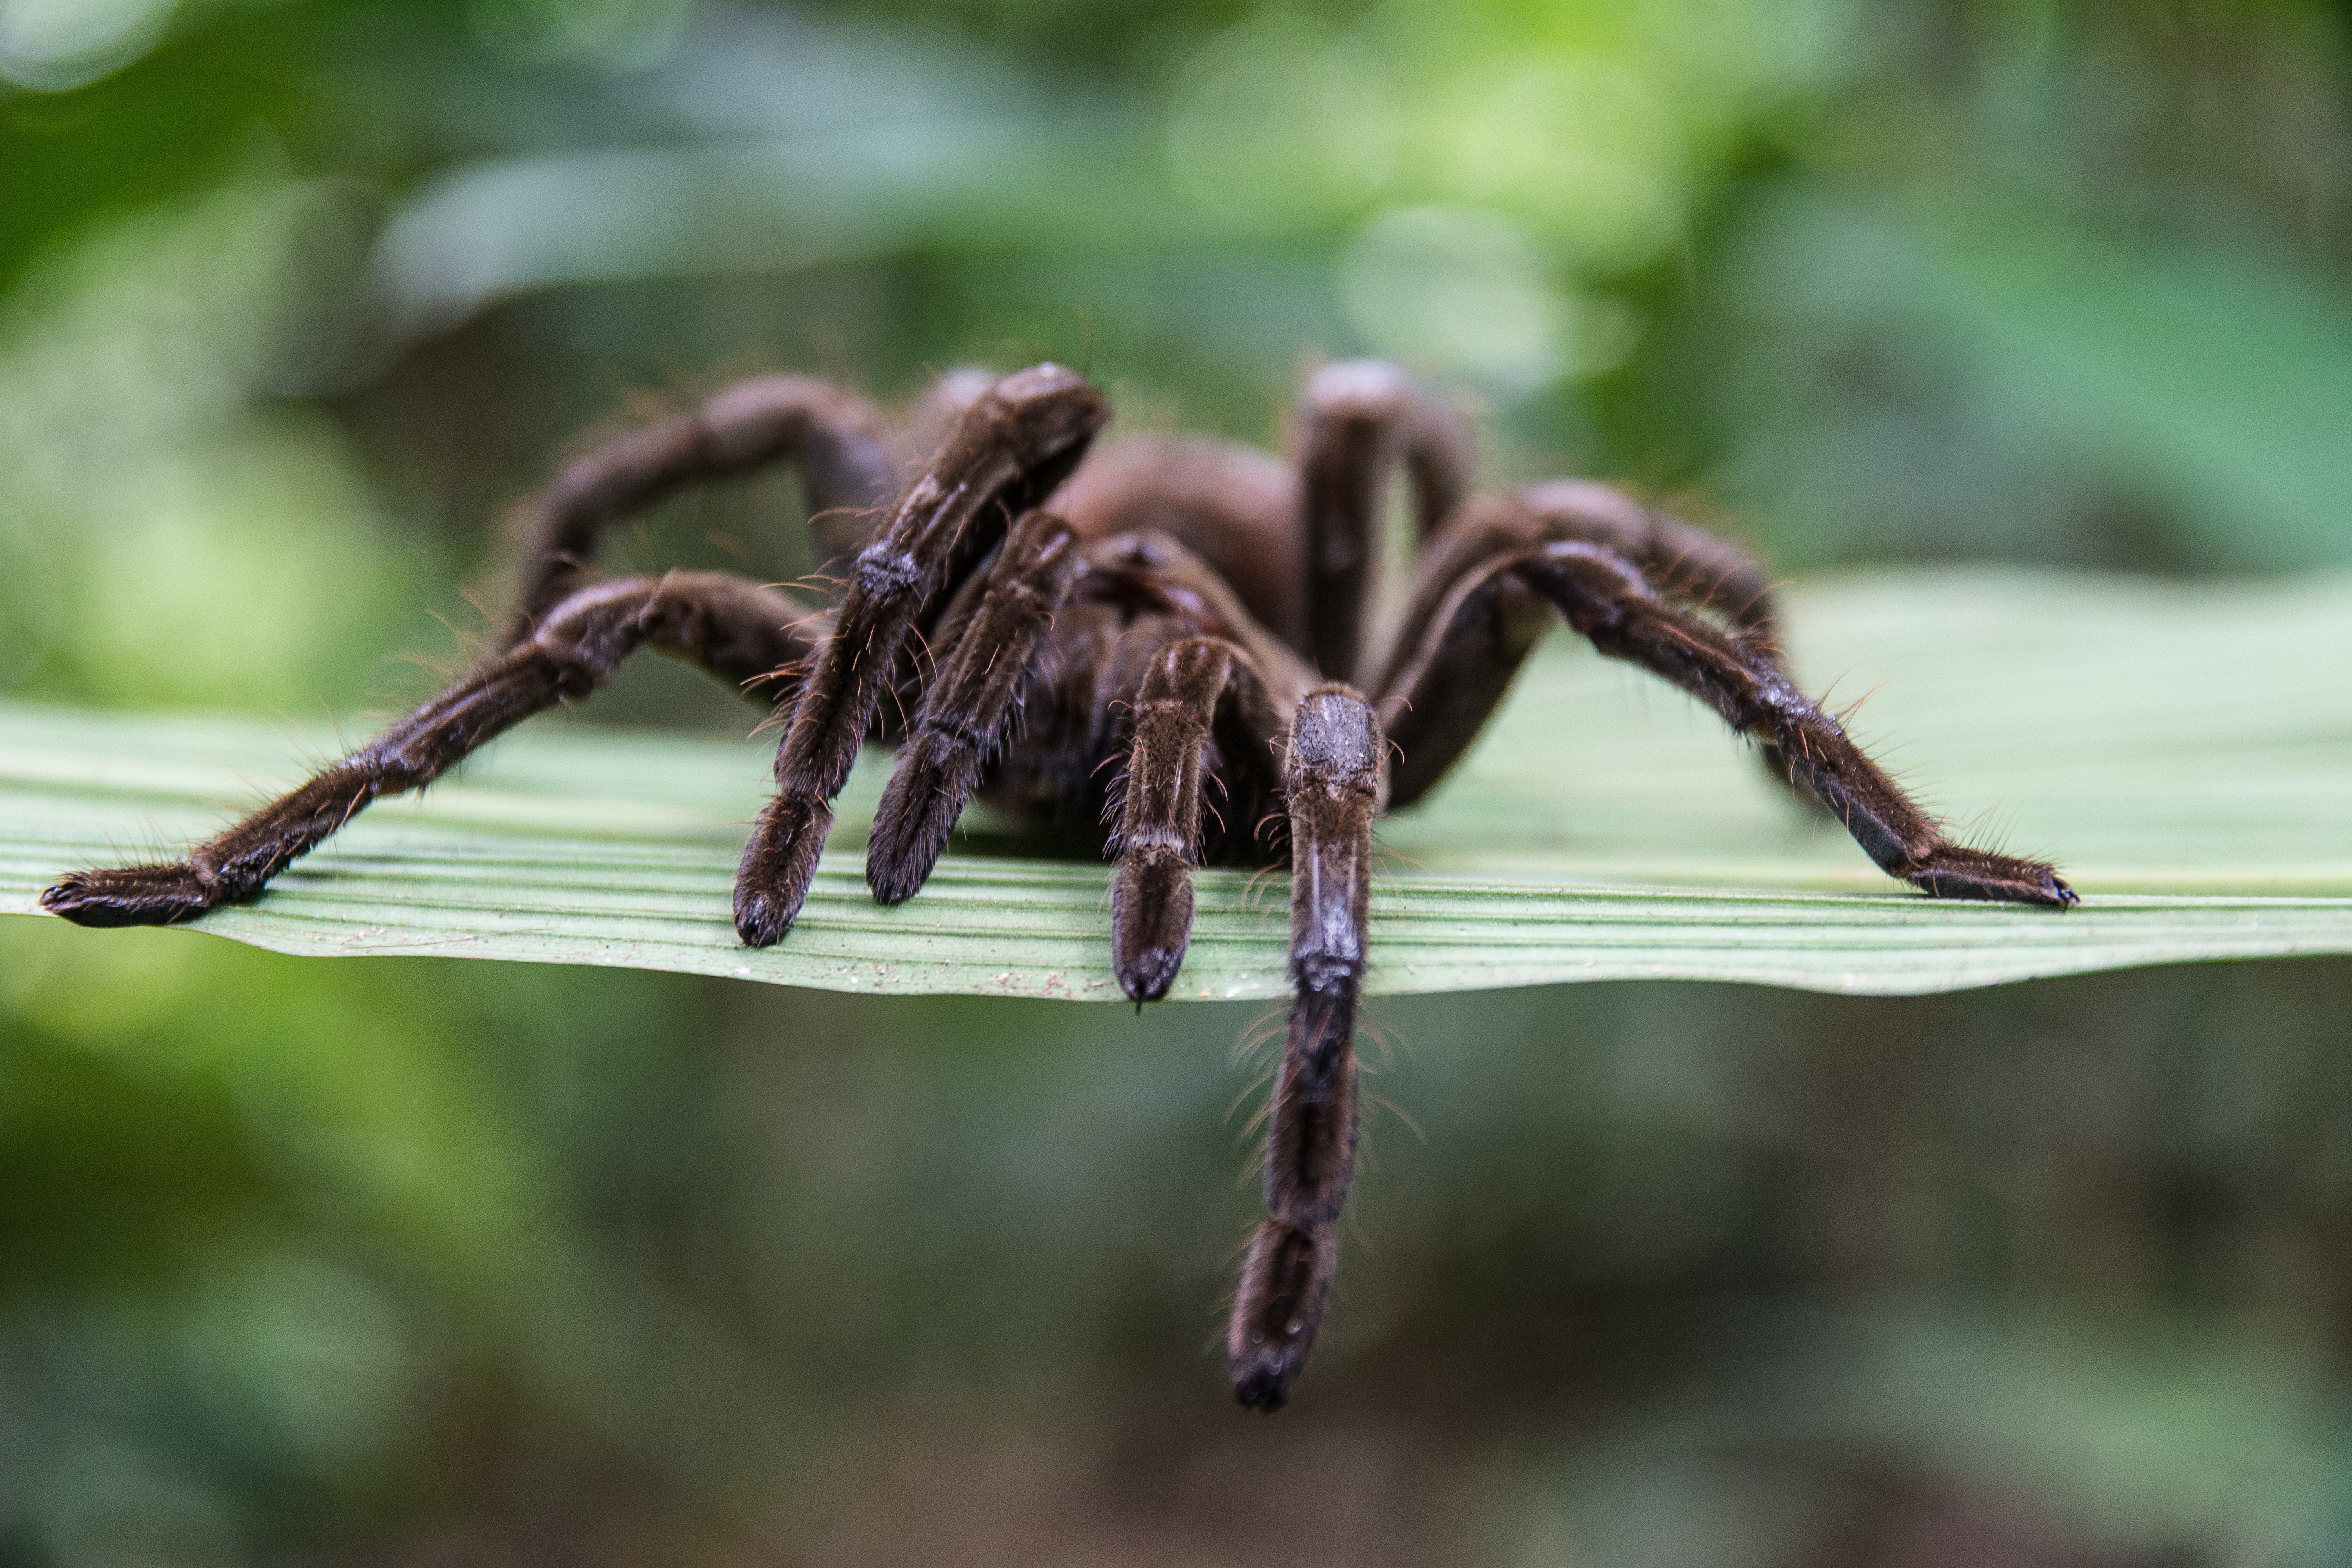 The venom of the Peruvian tarantula could be used to treat symptoms of IBS pain in humans in the future